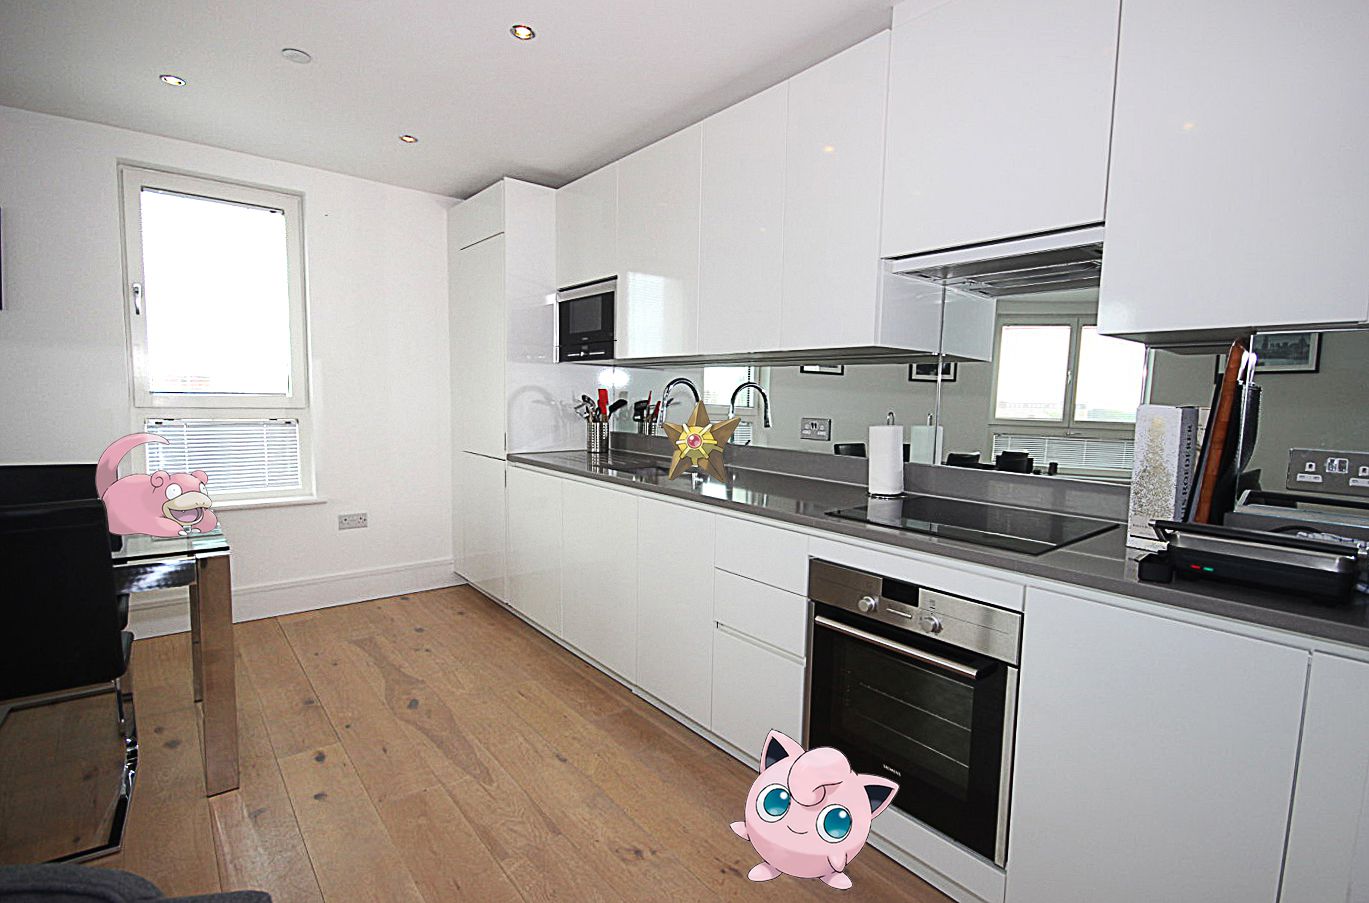 Jigglypuff ponders what to cook for dinner